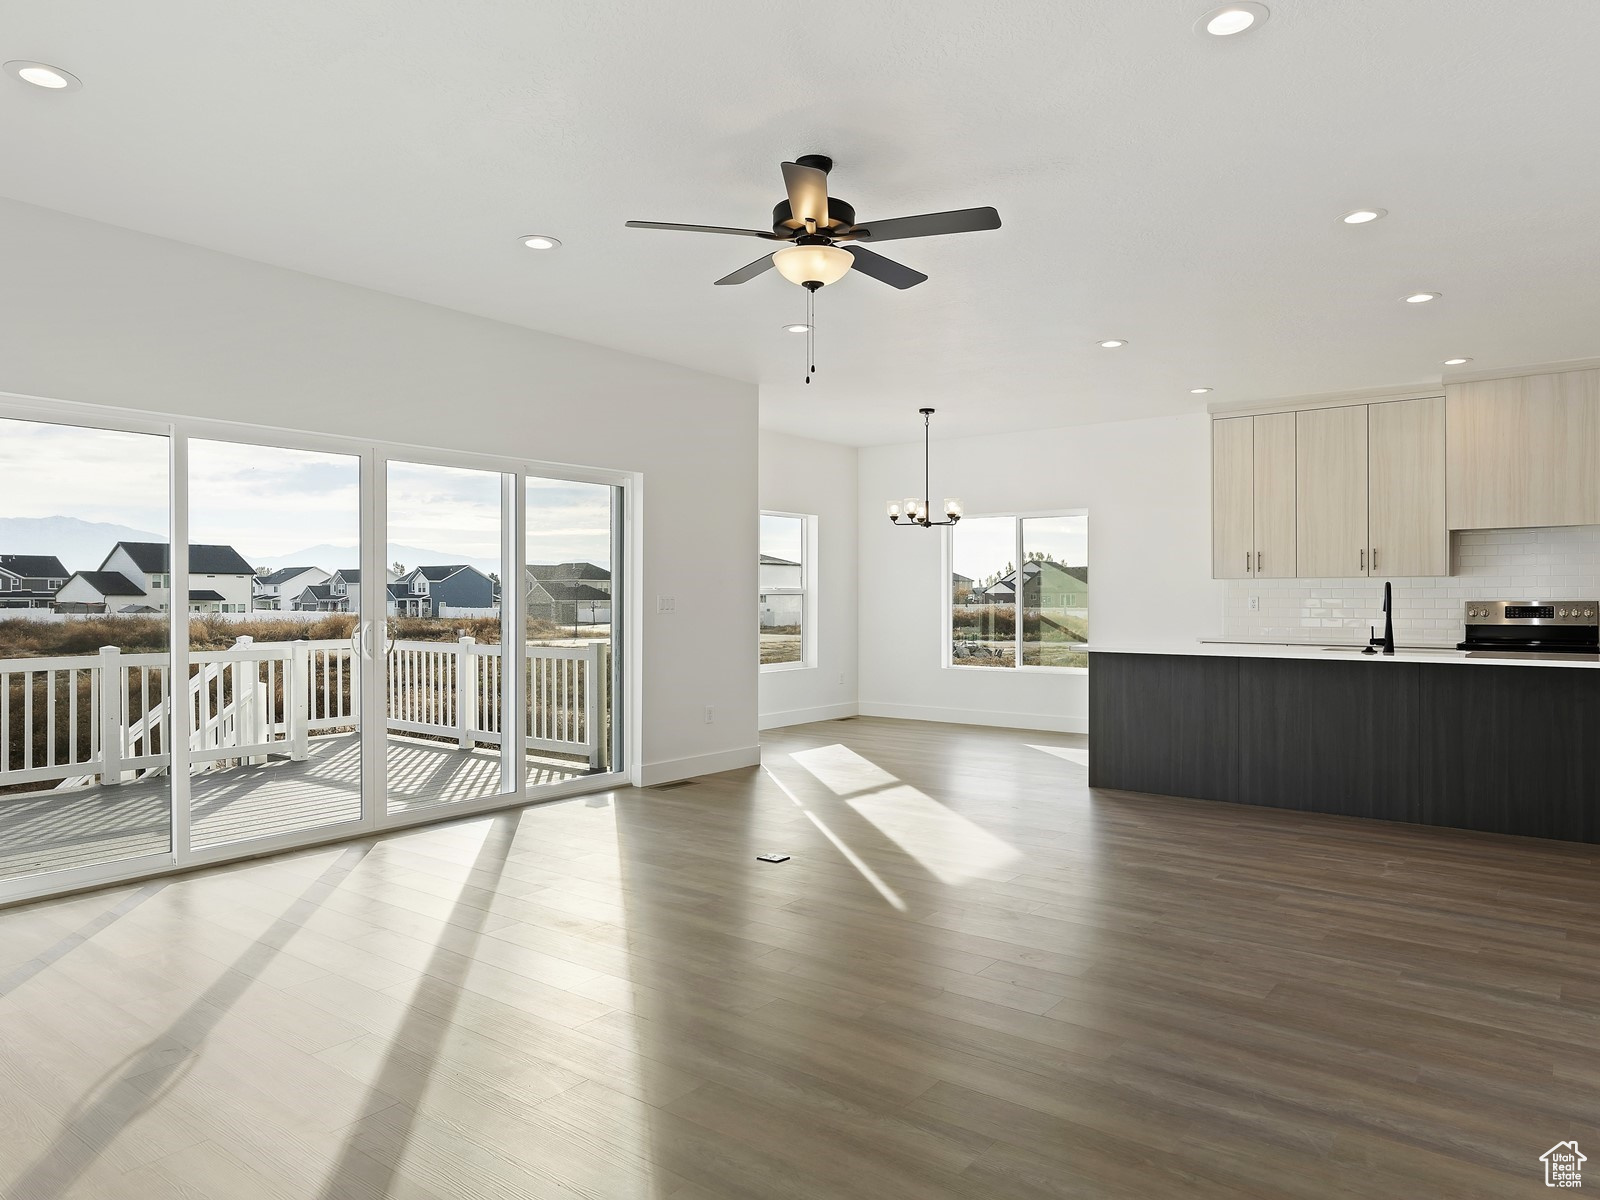 Open Concept Family Room with deck and kitchen in background